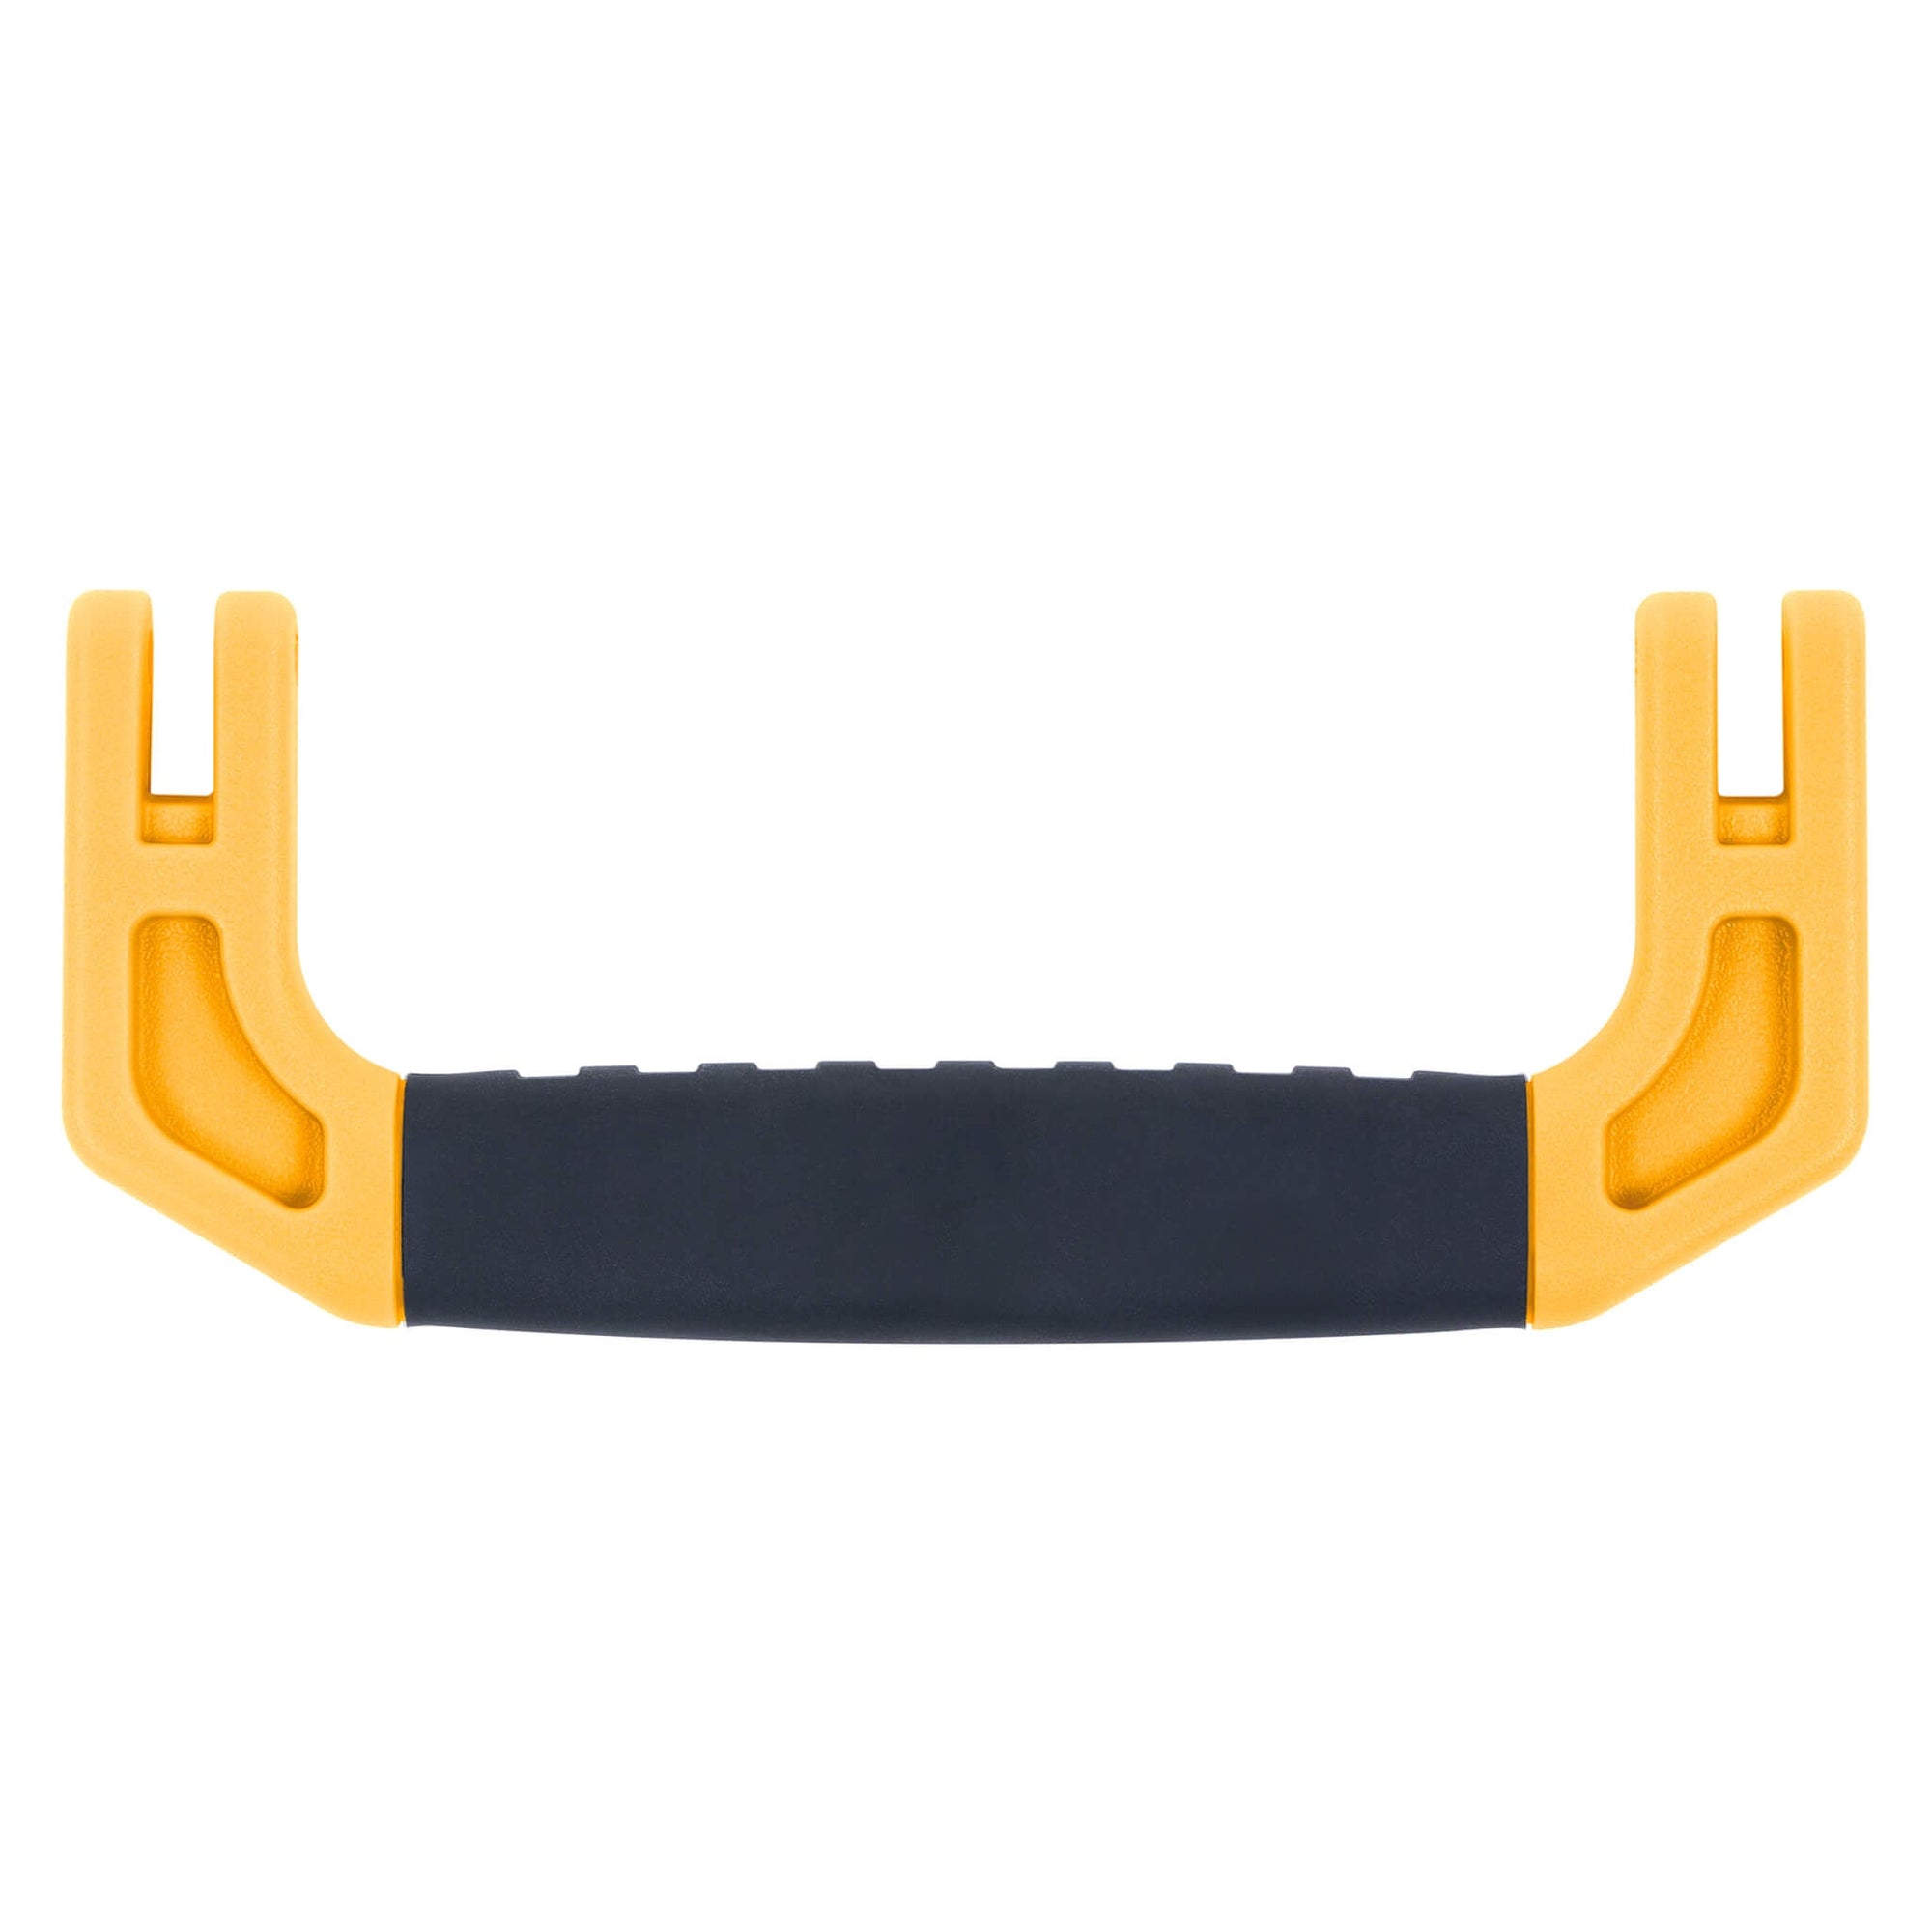 Pelican 1535 Air Rubber Overmolded Replacement Top Handle, Yellow ColorCase 